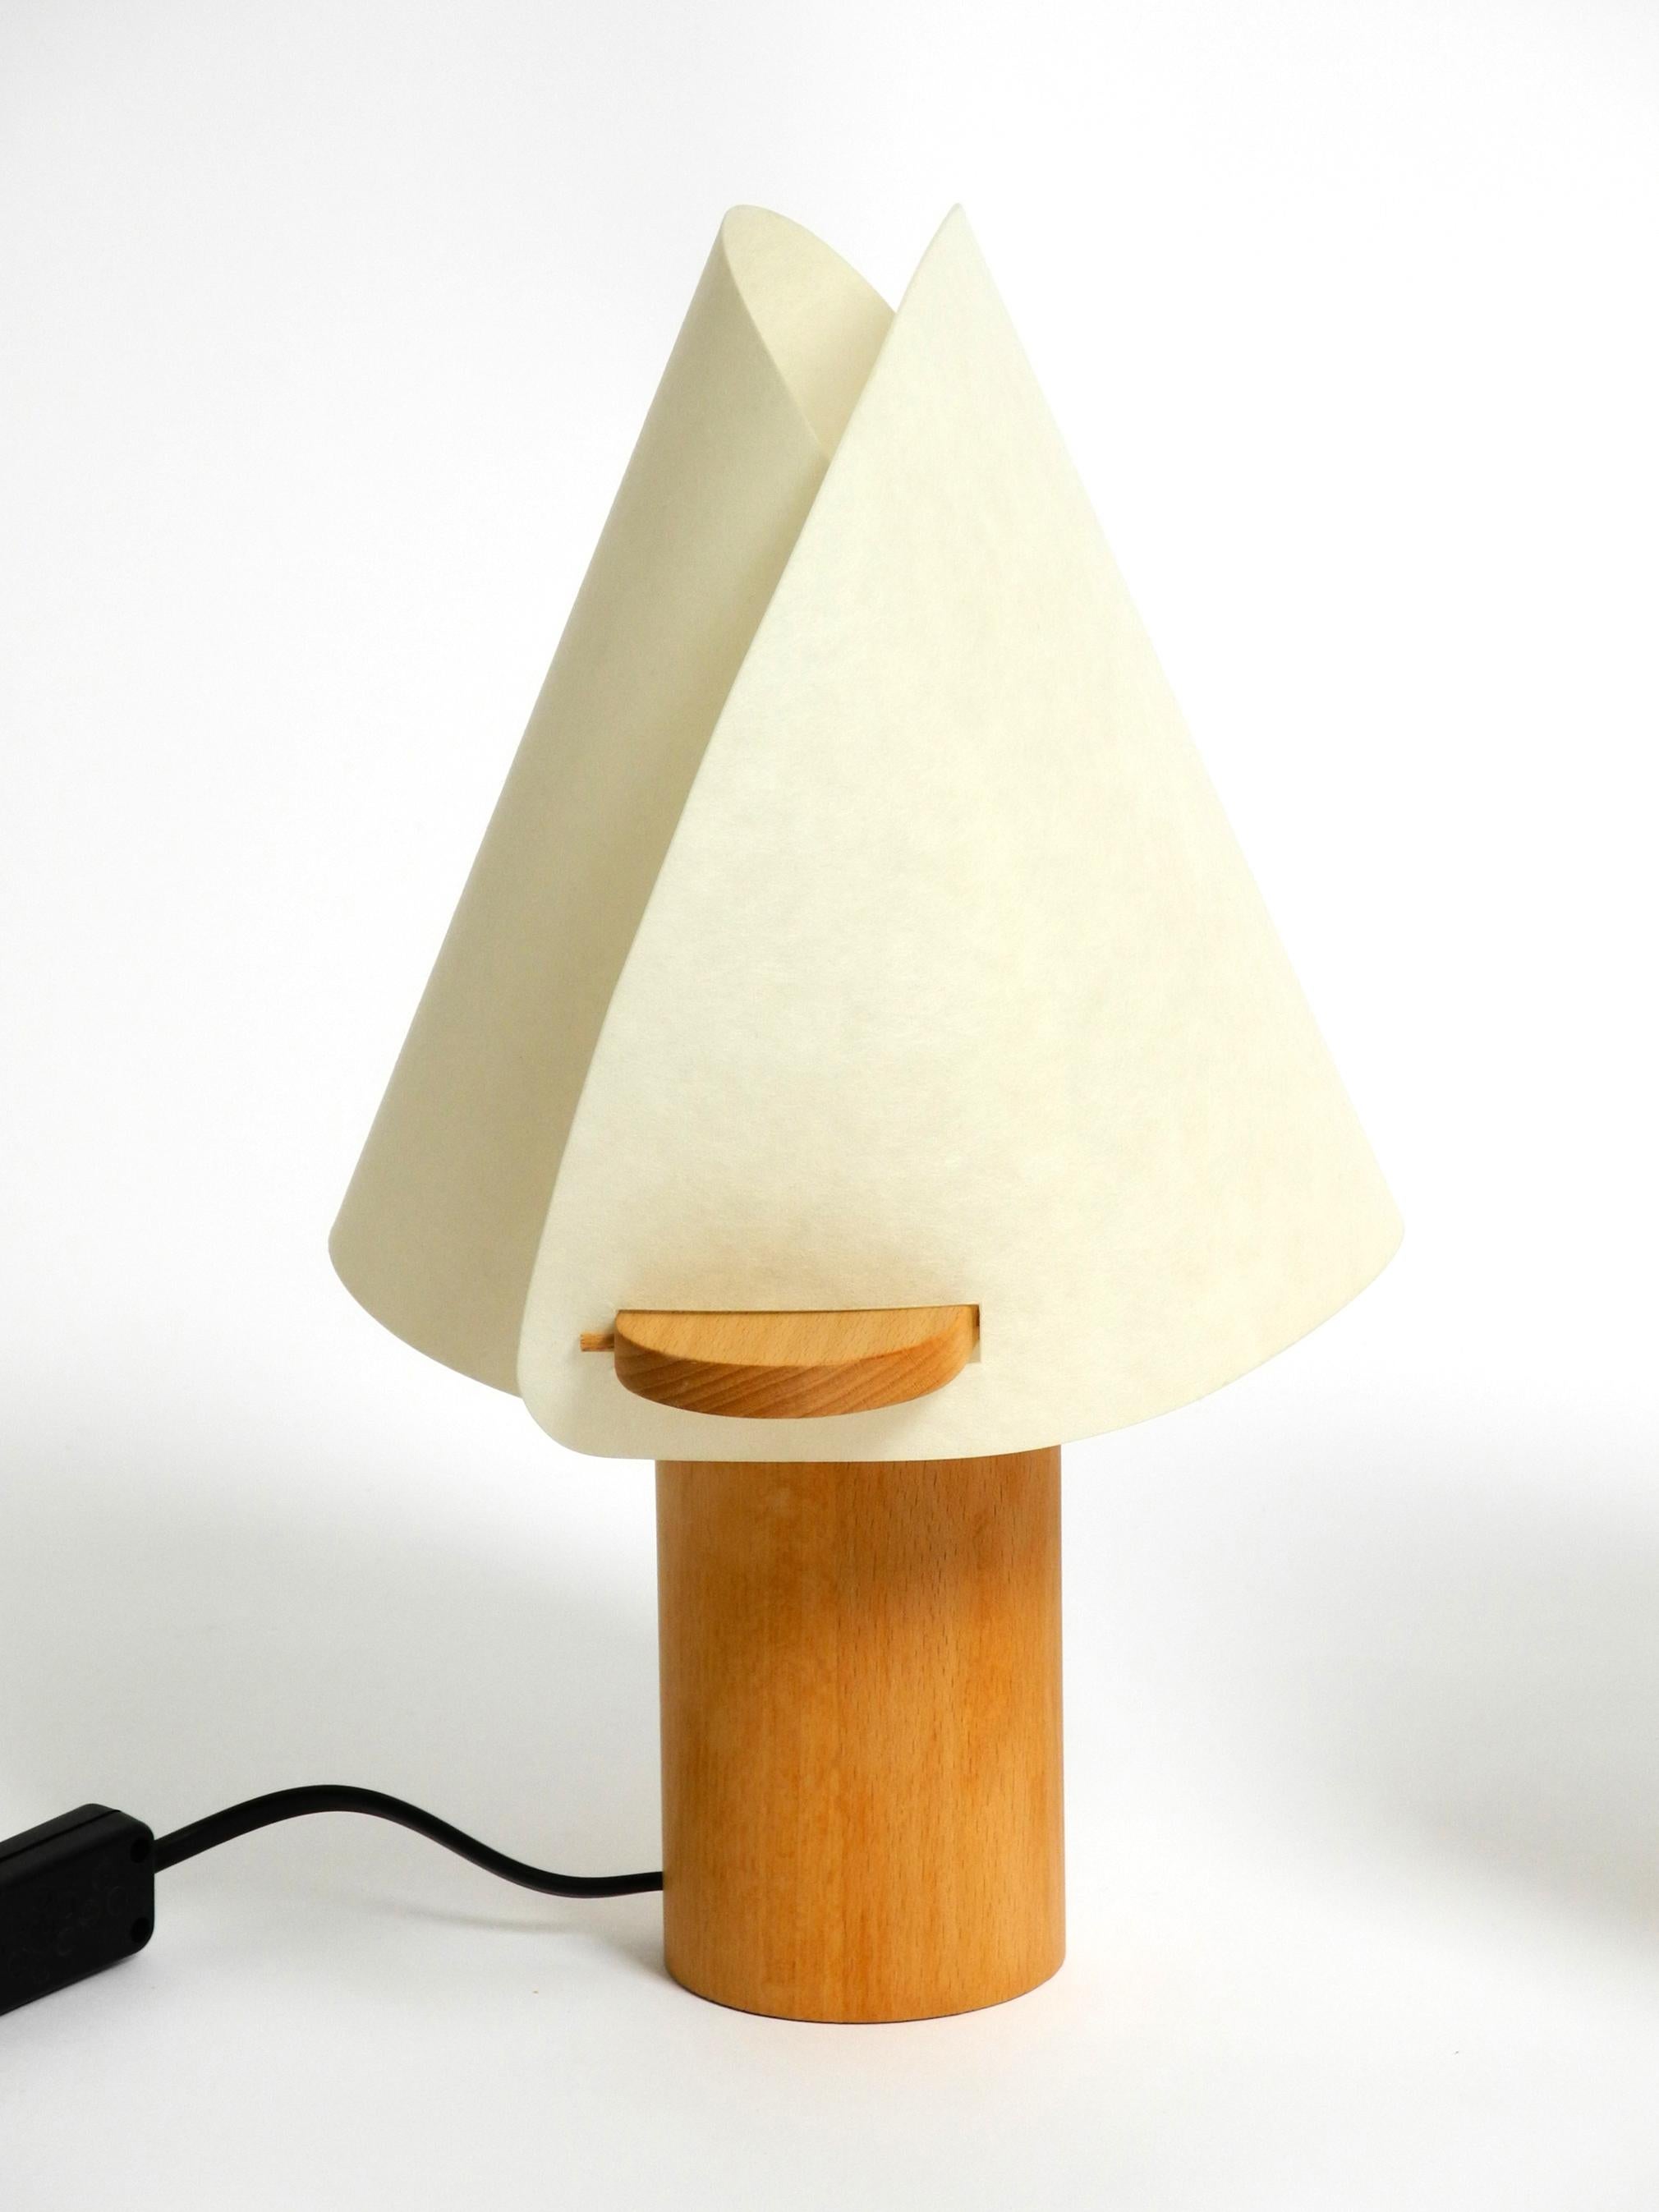 Two Charming Minimalistic Oak Table Lamps with Lunopal Shades by Domus  1980s For Sale 7